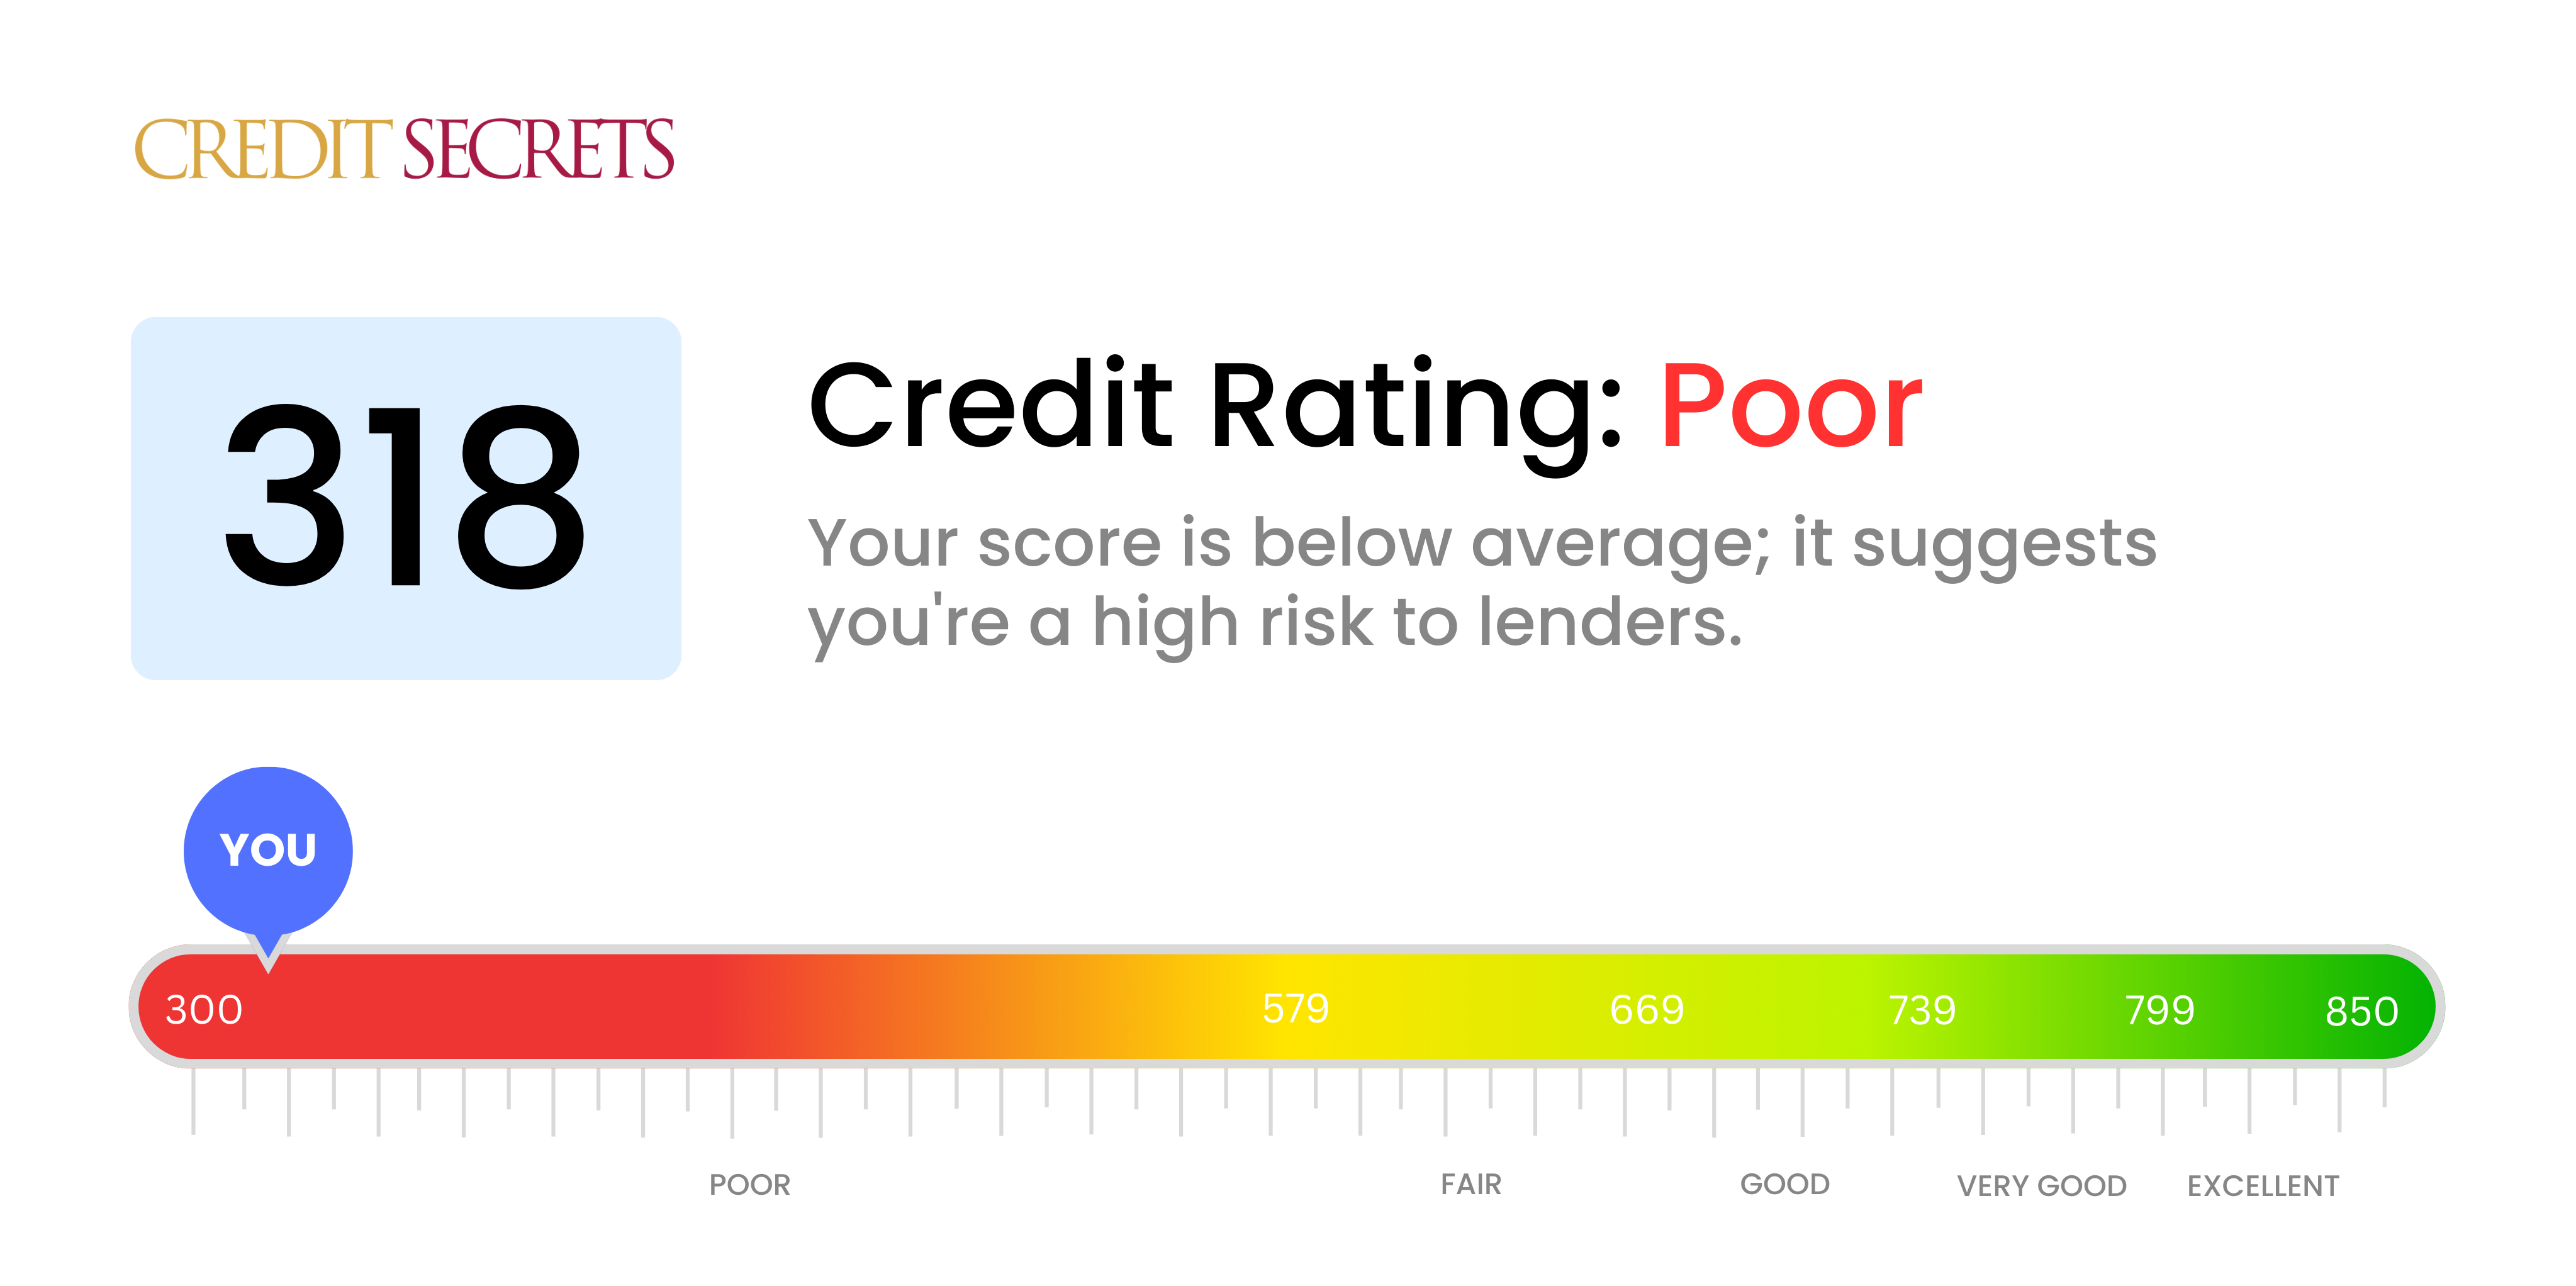 Is 318 a good credit score?